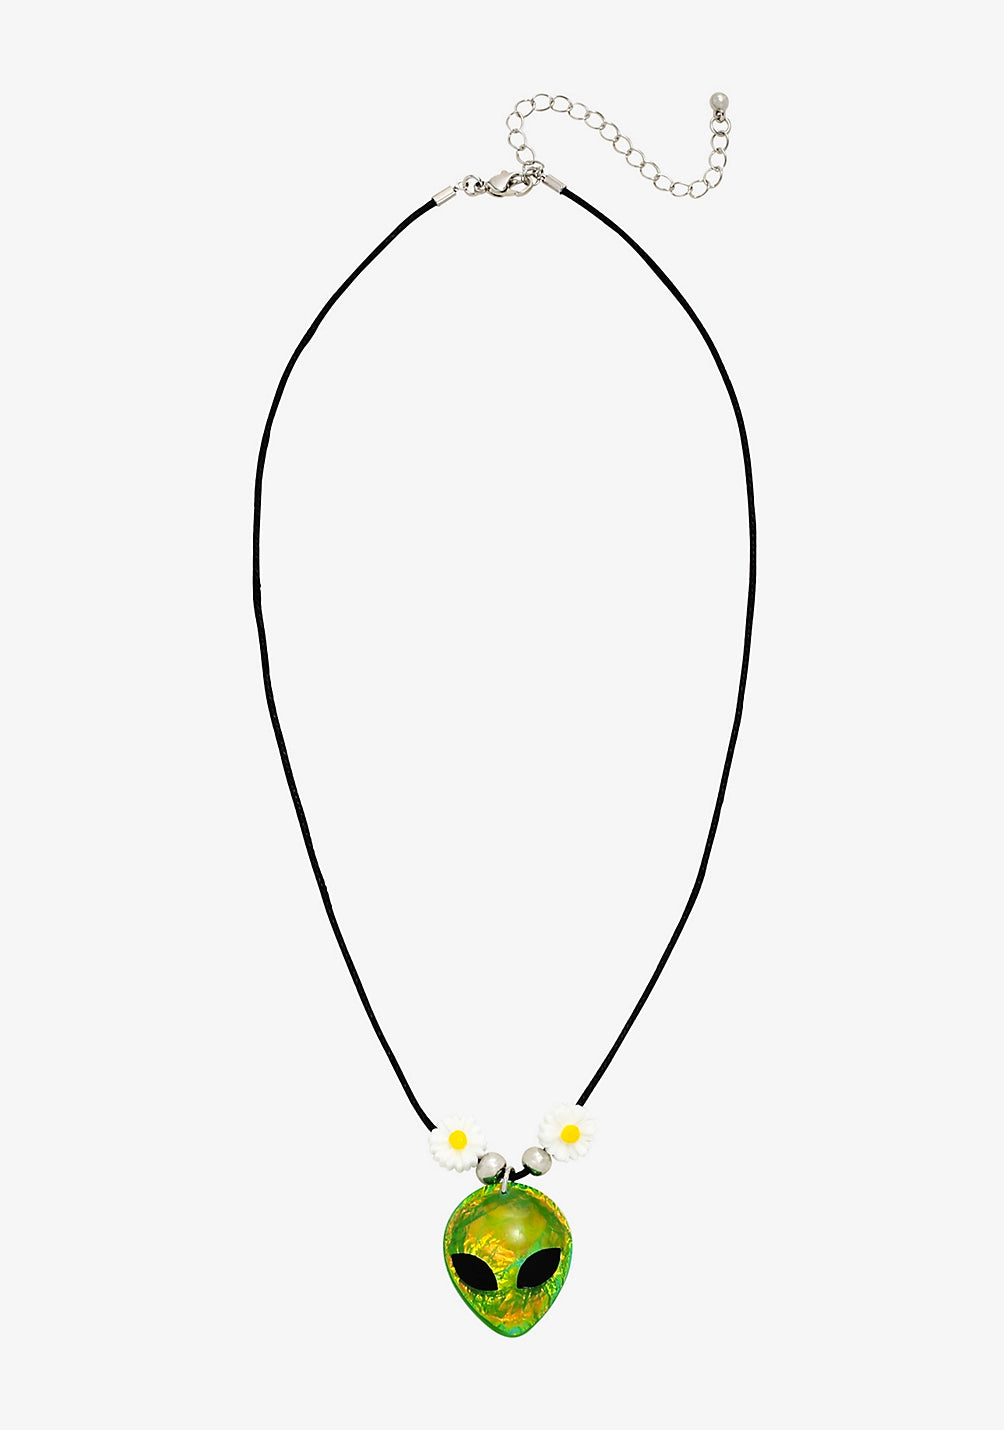 Alien Daisy Necklace - YOUAREMYPOISON